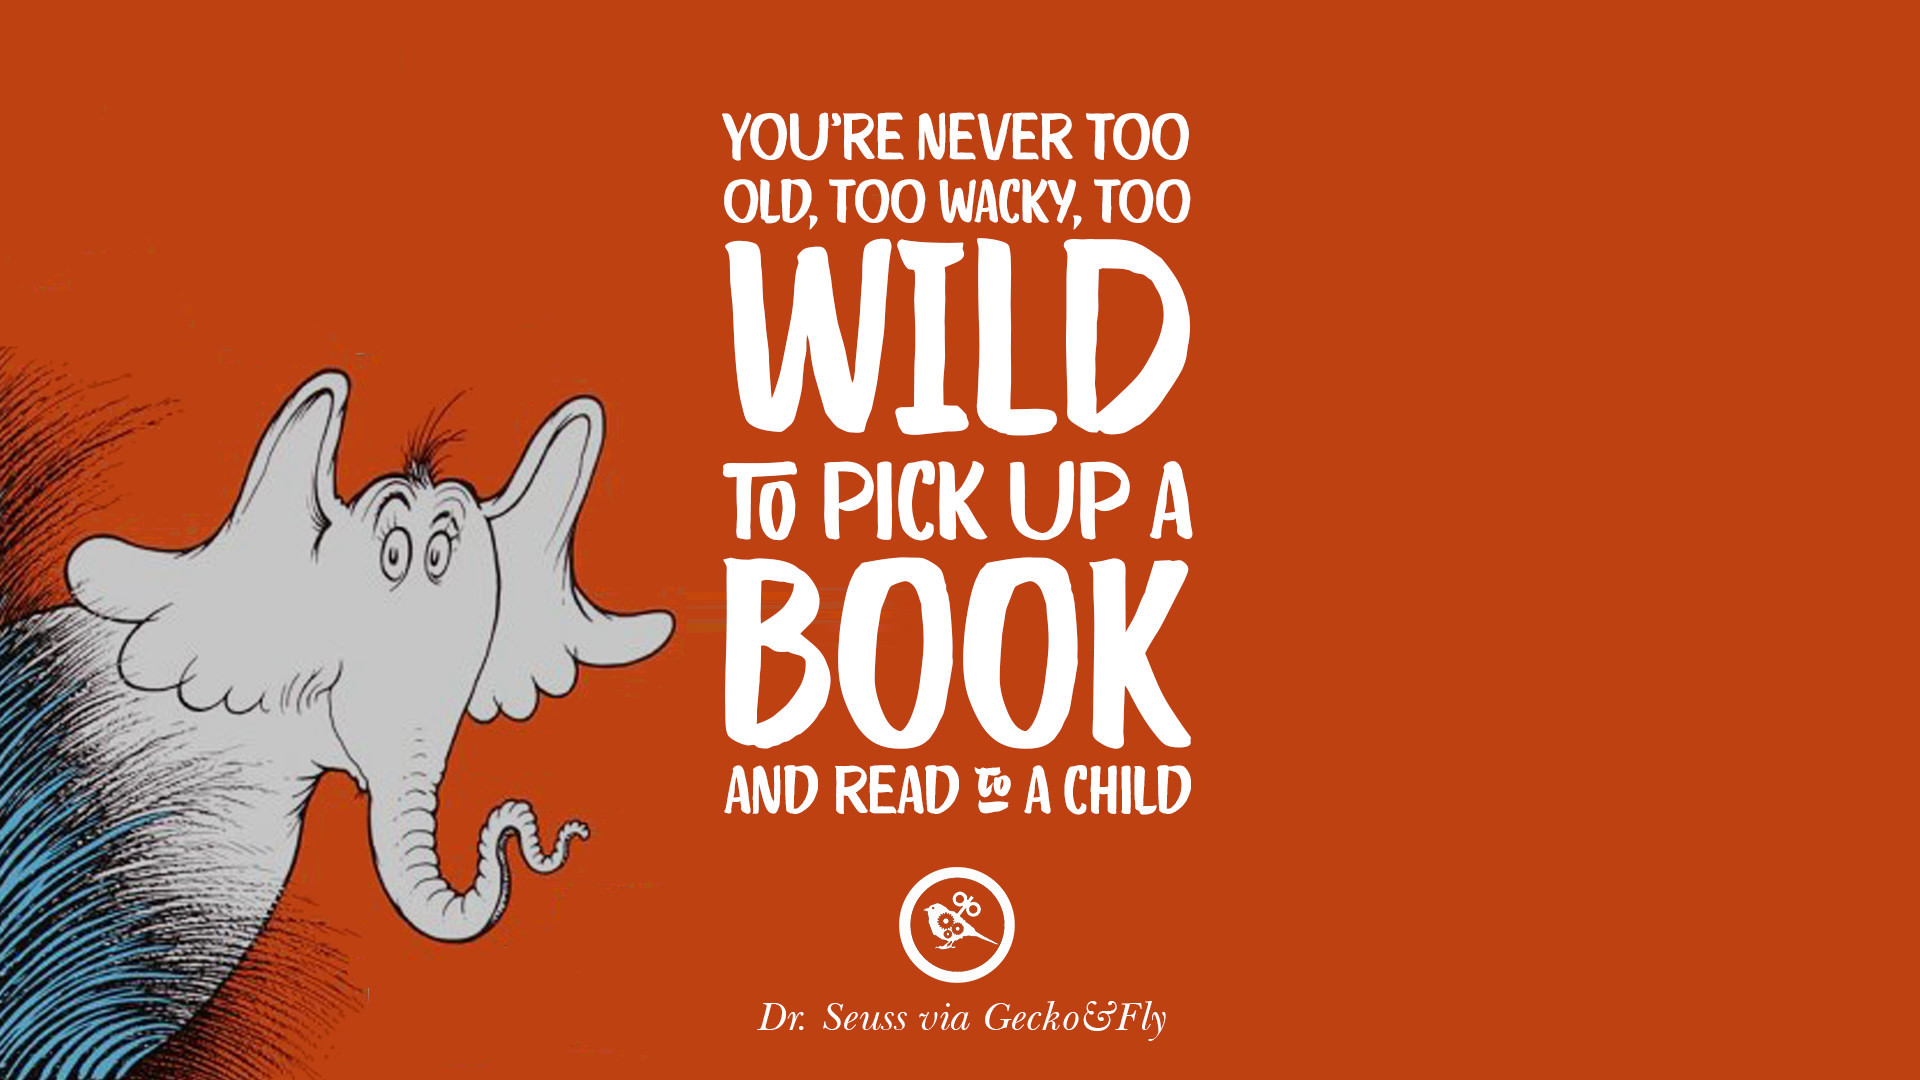 1920x1080 You're never too old, too wacky, too wild to pick up a book and read to a  child. – Dr Seuss